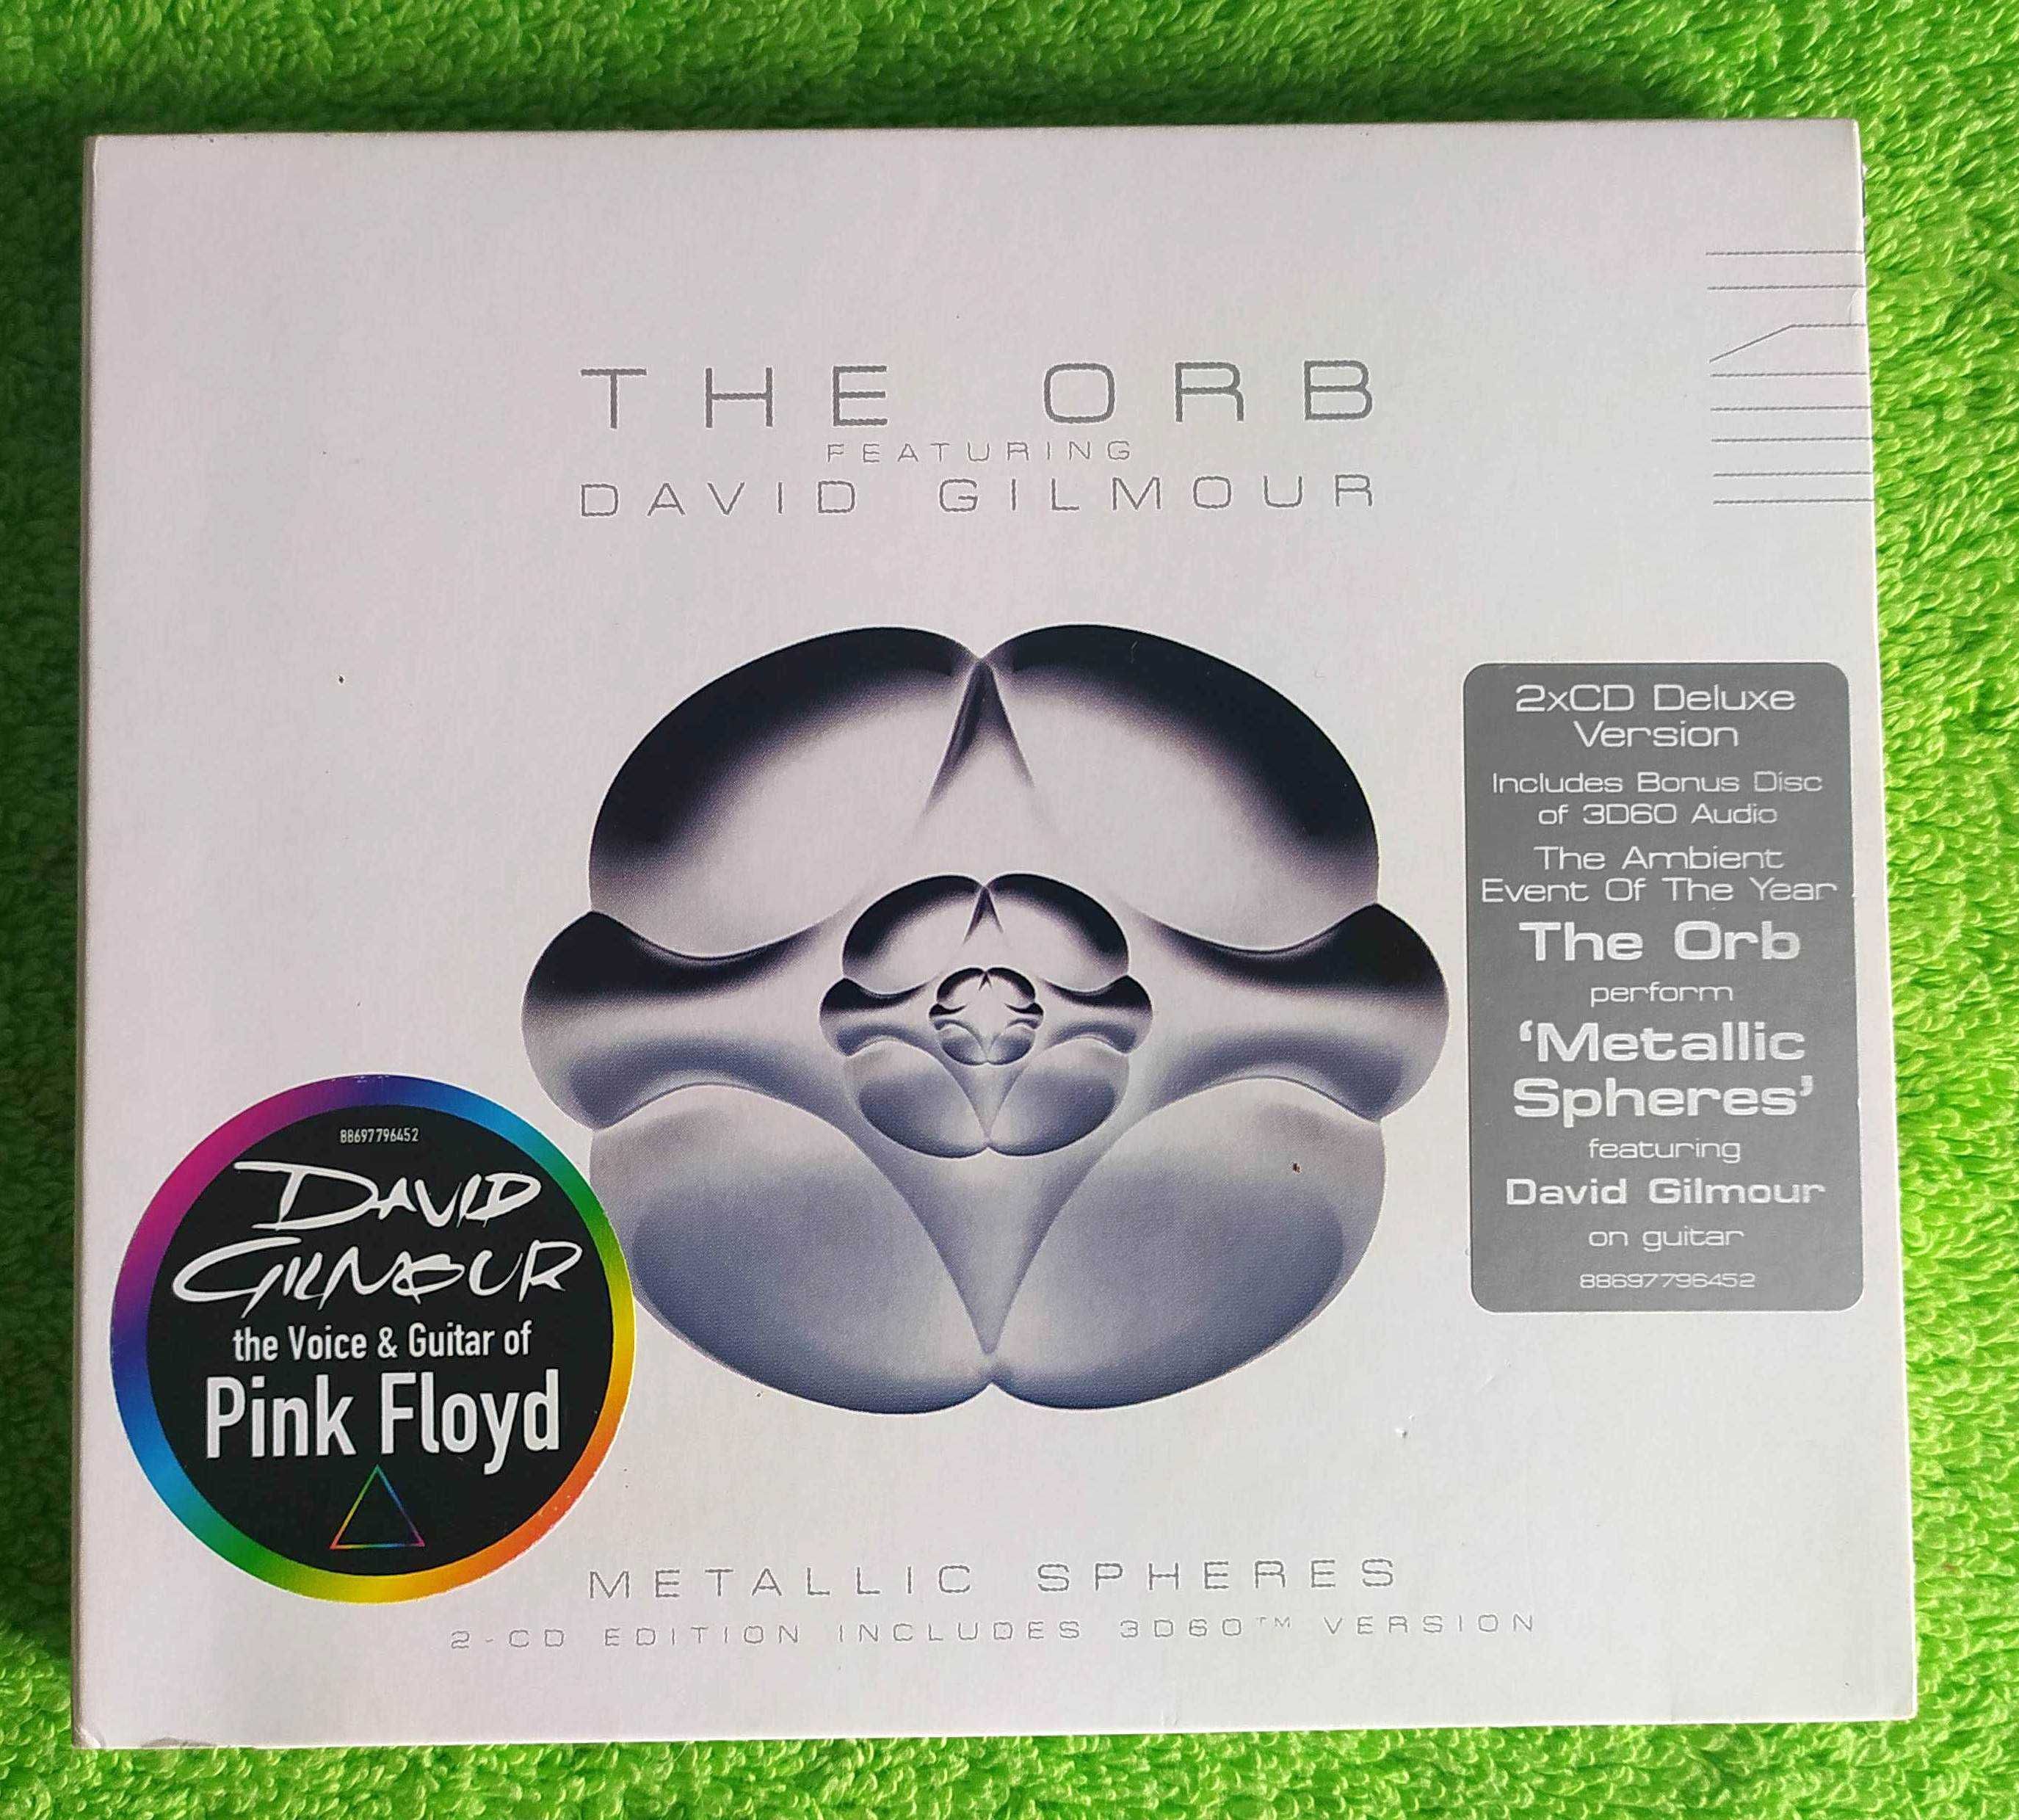 The Orb Featuring David Gilmour (2-CD)  "Metallic Spheres" 3D60™ 2010